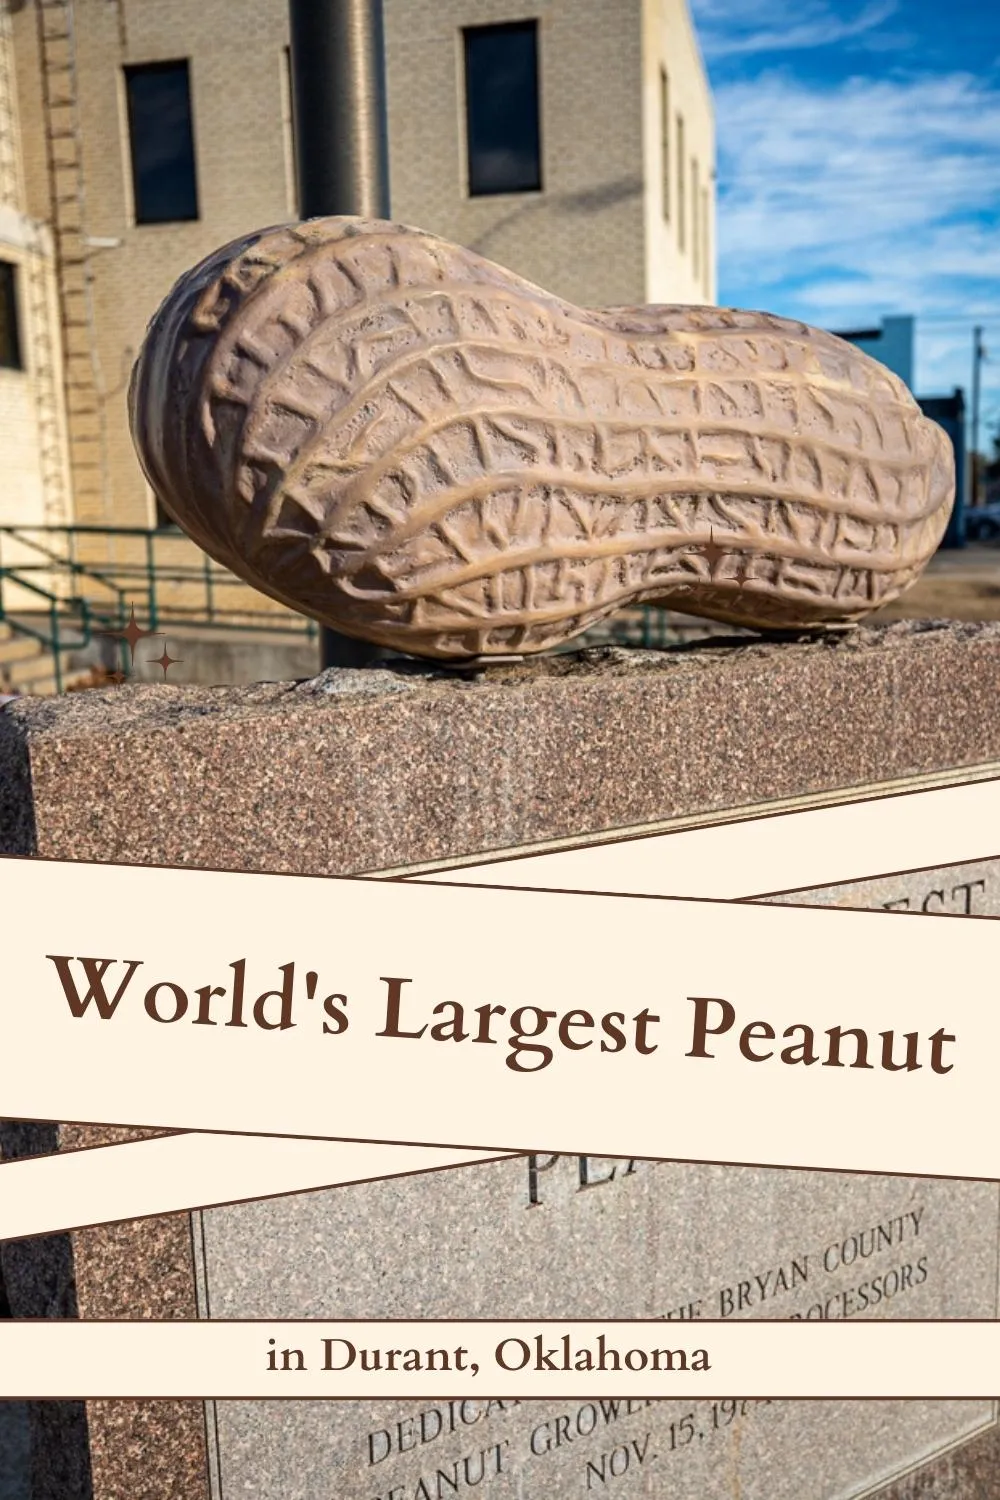 I'm NUTS about this roadside attraction, and I'm sure you will be too. It's the World's Largest Peanut in Durant, Oklahoma. This giant peanut roadside attraction in 3 feet long - small for a world's largest thing but gigantic in comparison to a normal-sized peanut. Visit this weird roadside attraction your Oklahoma road trip! #RoadTrip #Oklahoma #OklahomaRoadTrip #RoadsideAmerica #Roadsideattraction #RoadsideAttractions #OklahomaRoadsideAttraction